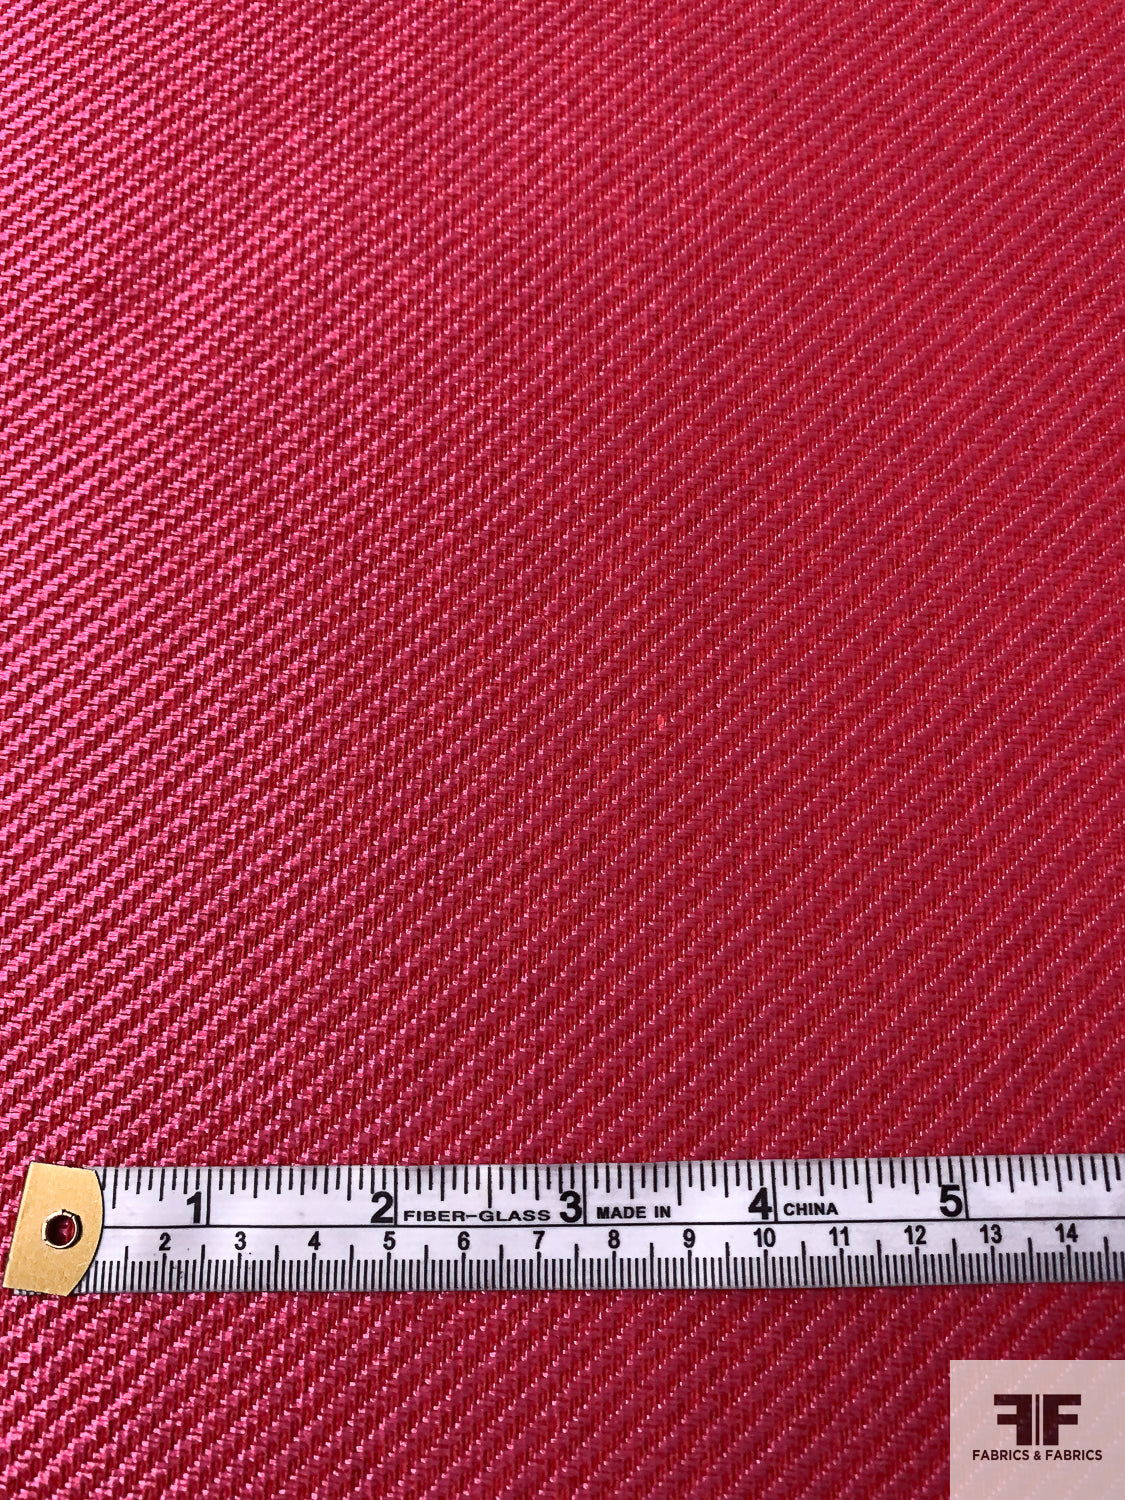 High-Sheen Gabardine-Weave Ladies Suiting - Hot Pink / Red